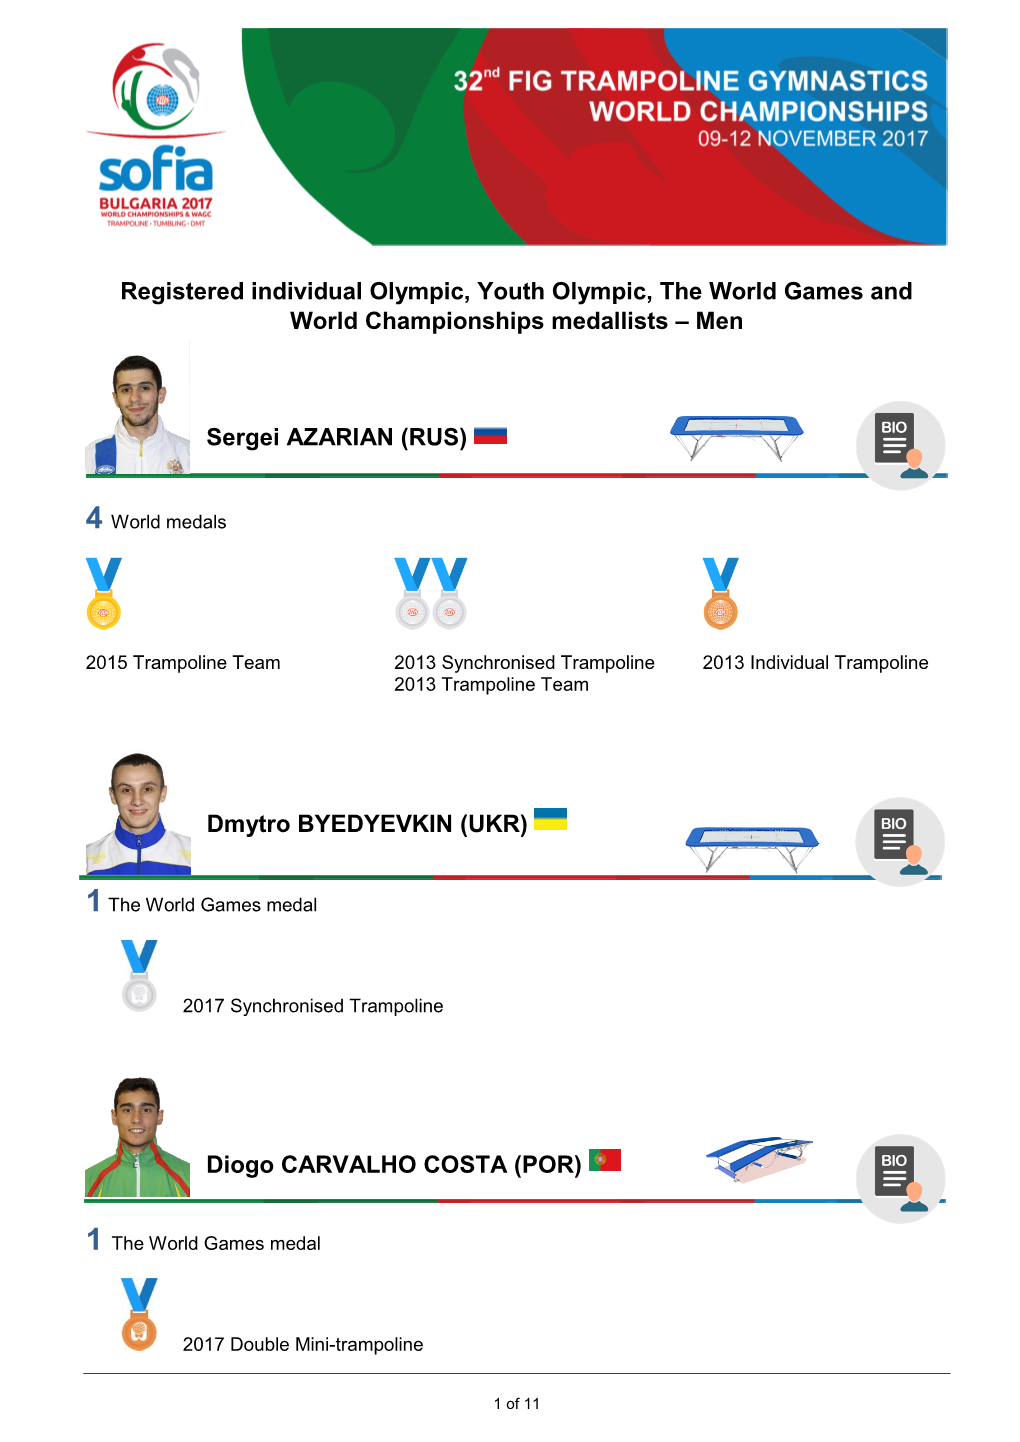 Registered Individual Olympic, Youth Olympic, the World Games and World Championships Medallists – Men